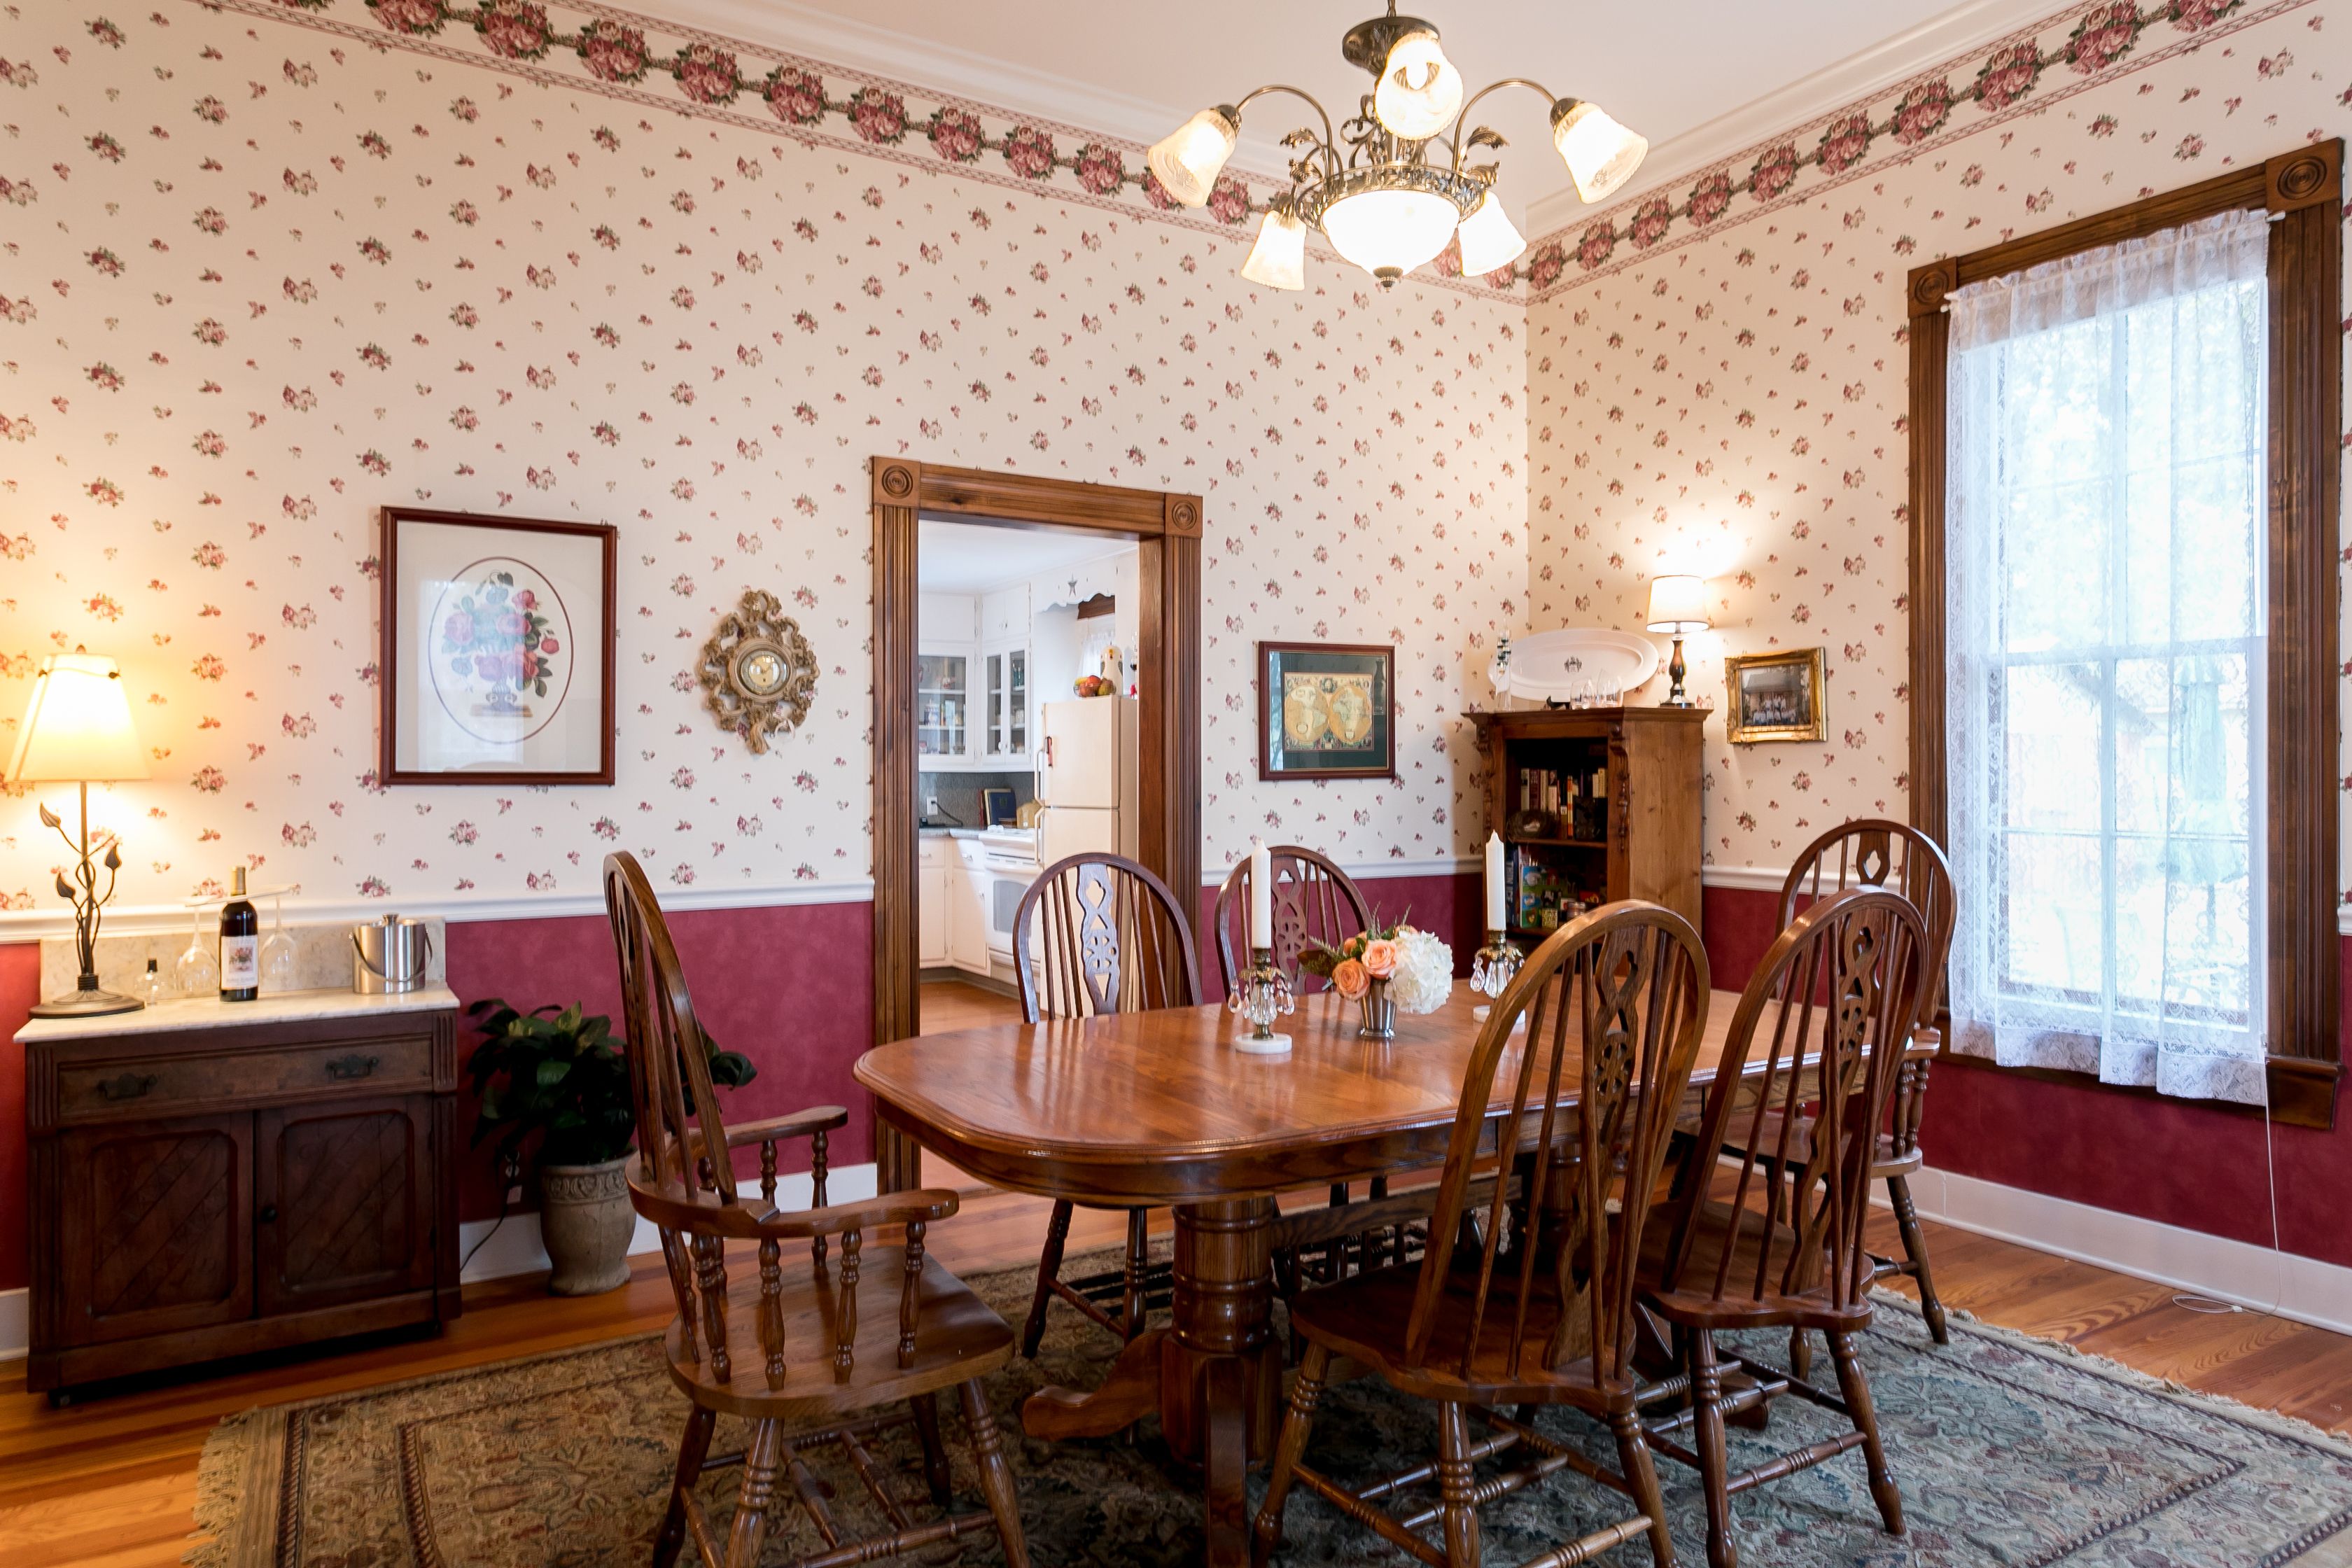 The Spacious Dining Room Includes Seating For Up To Six And